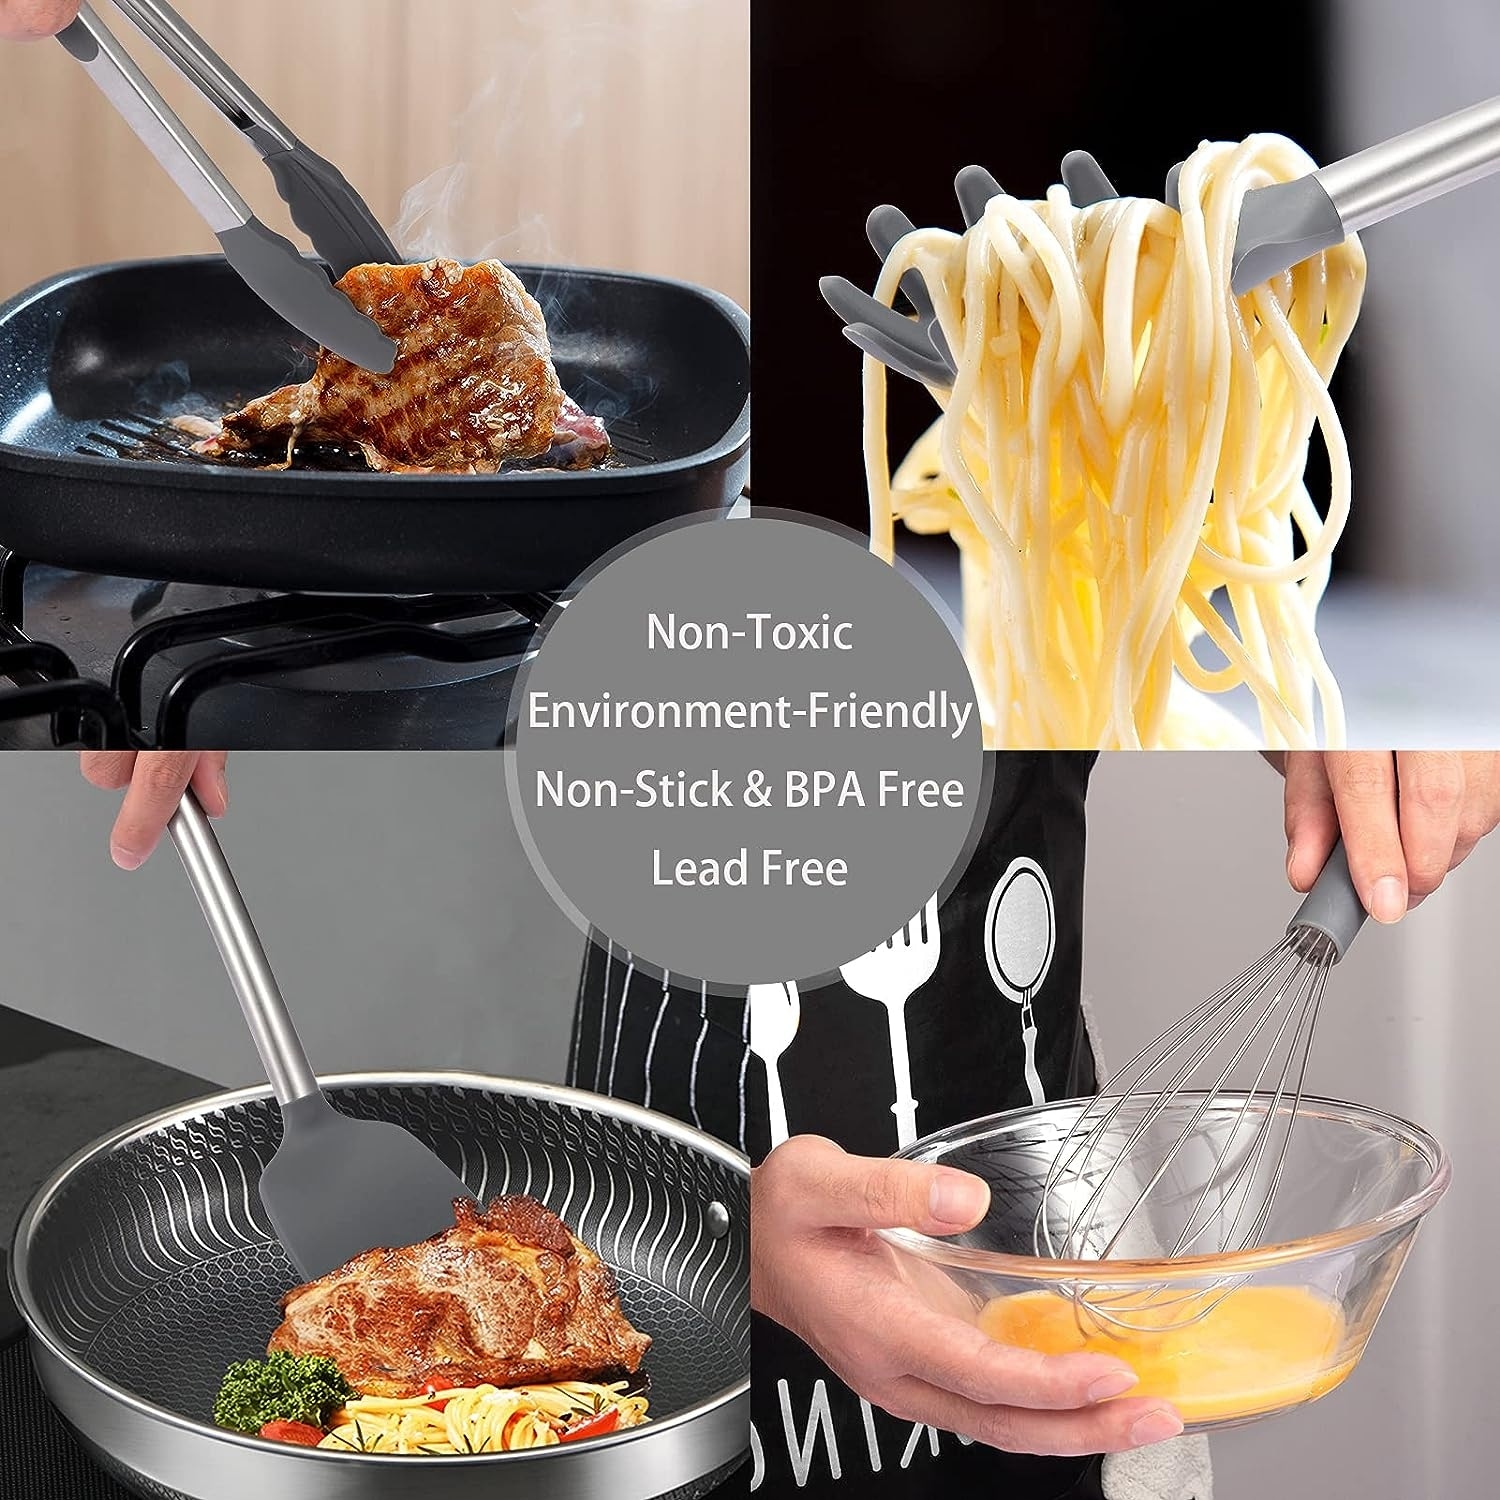 https://ak1.ostkcdn.com/images/products/is/images/direct/7a4403aed92682e167be829a41028b00b91bf532/Kitchen-Utensils-Set-with-Holder%2C-Silicone-Cooking-Utensils-Gadget.jpg